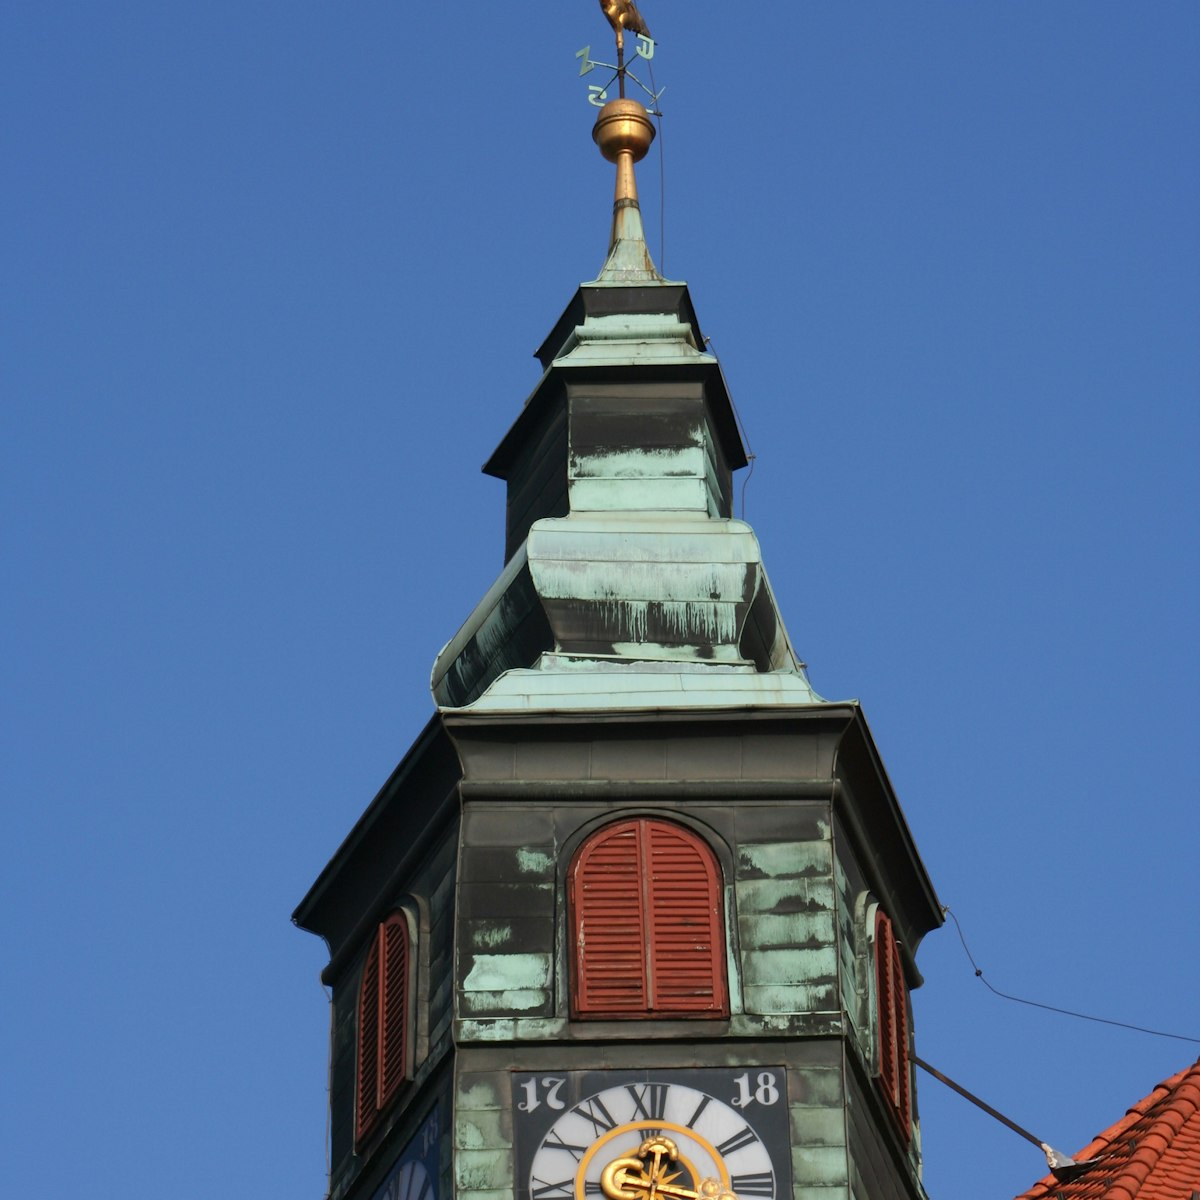 Detail of Clock Tower of Town Hall.